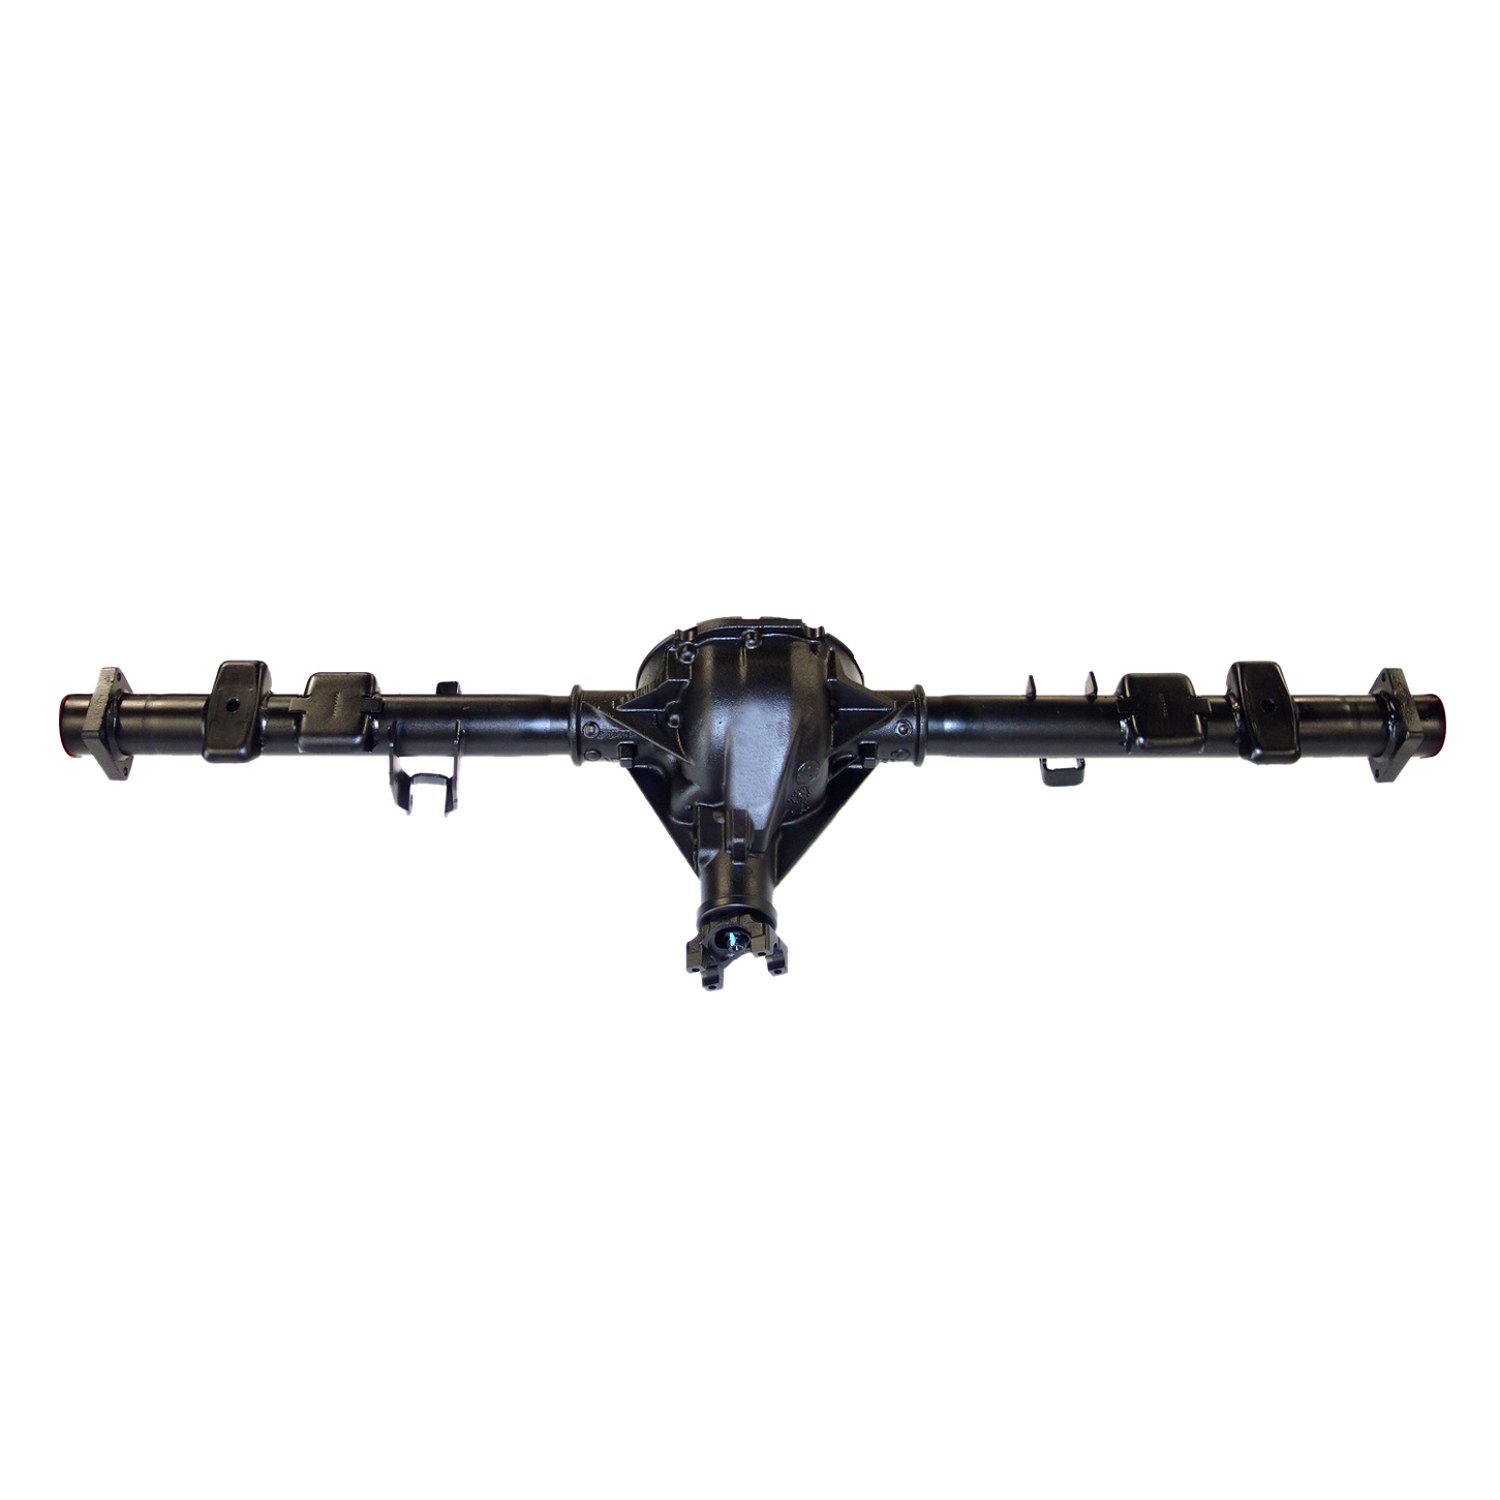 Remanufactured Axle Assy for GM 8.6" 05-07 Chevy Silverado 3.23 , Drum Brakes, Posi LSD